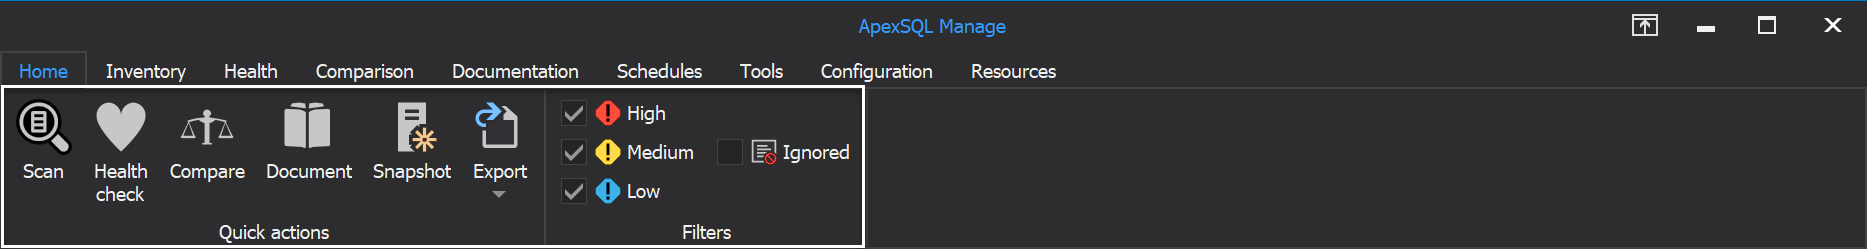 The Home tab of SQL manage instance tool 